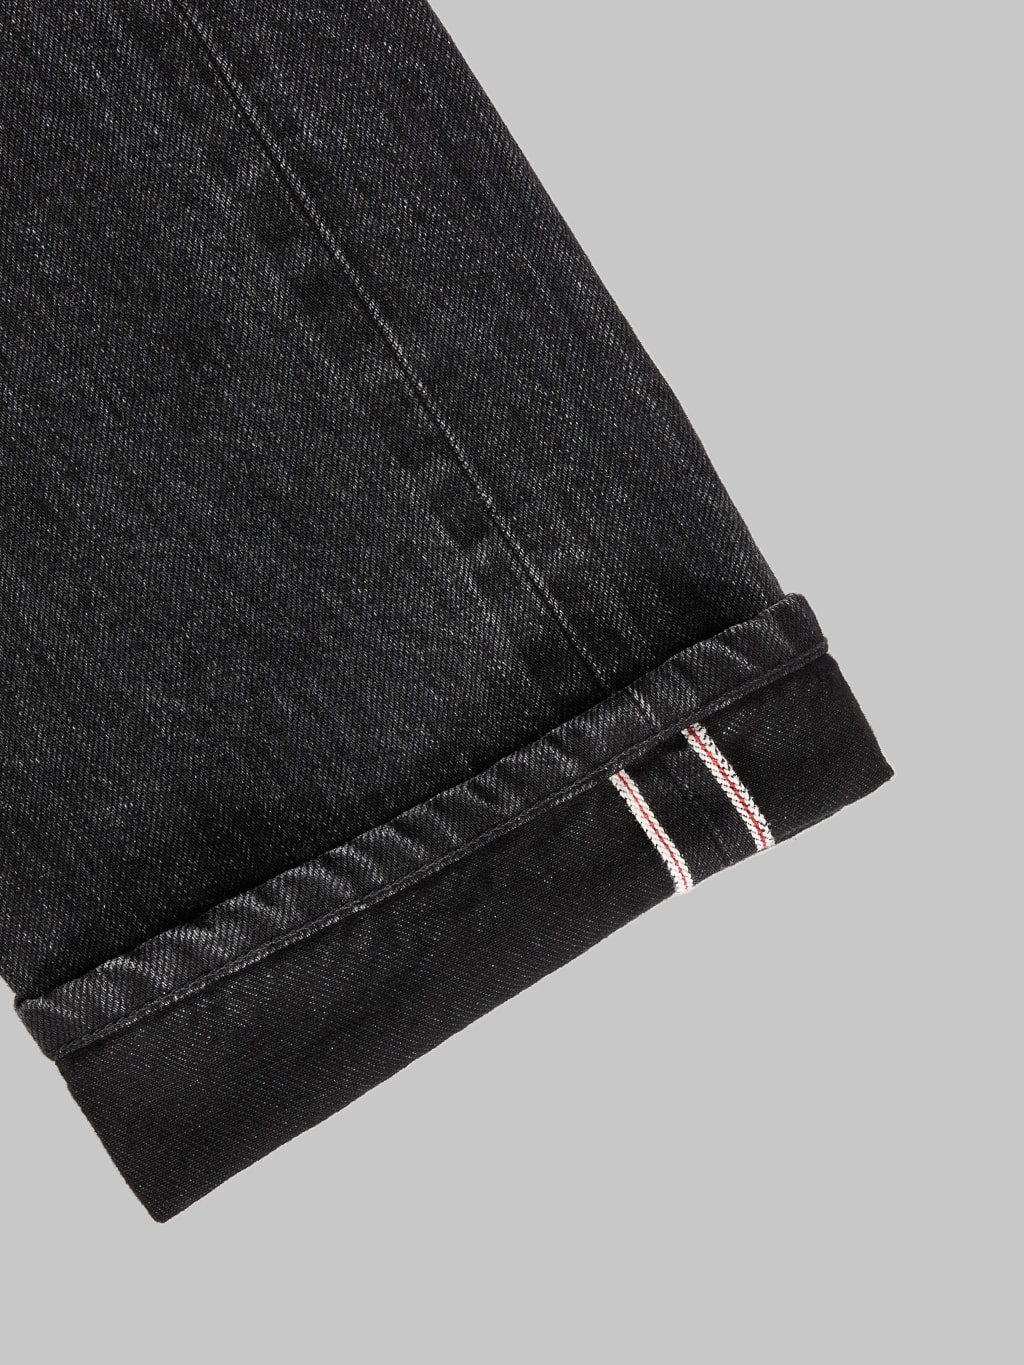 3sixteen CT 220x Classic Tapered Stonewashed Double Black selvedge line